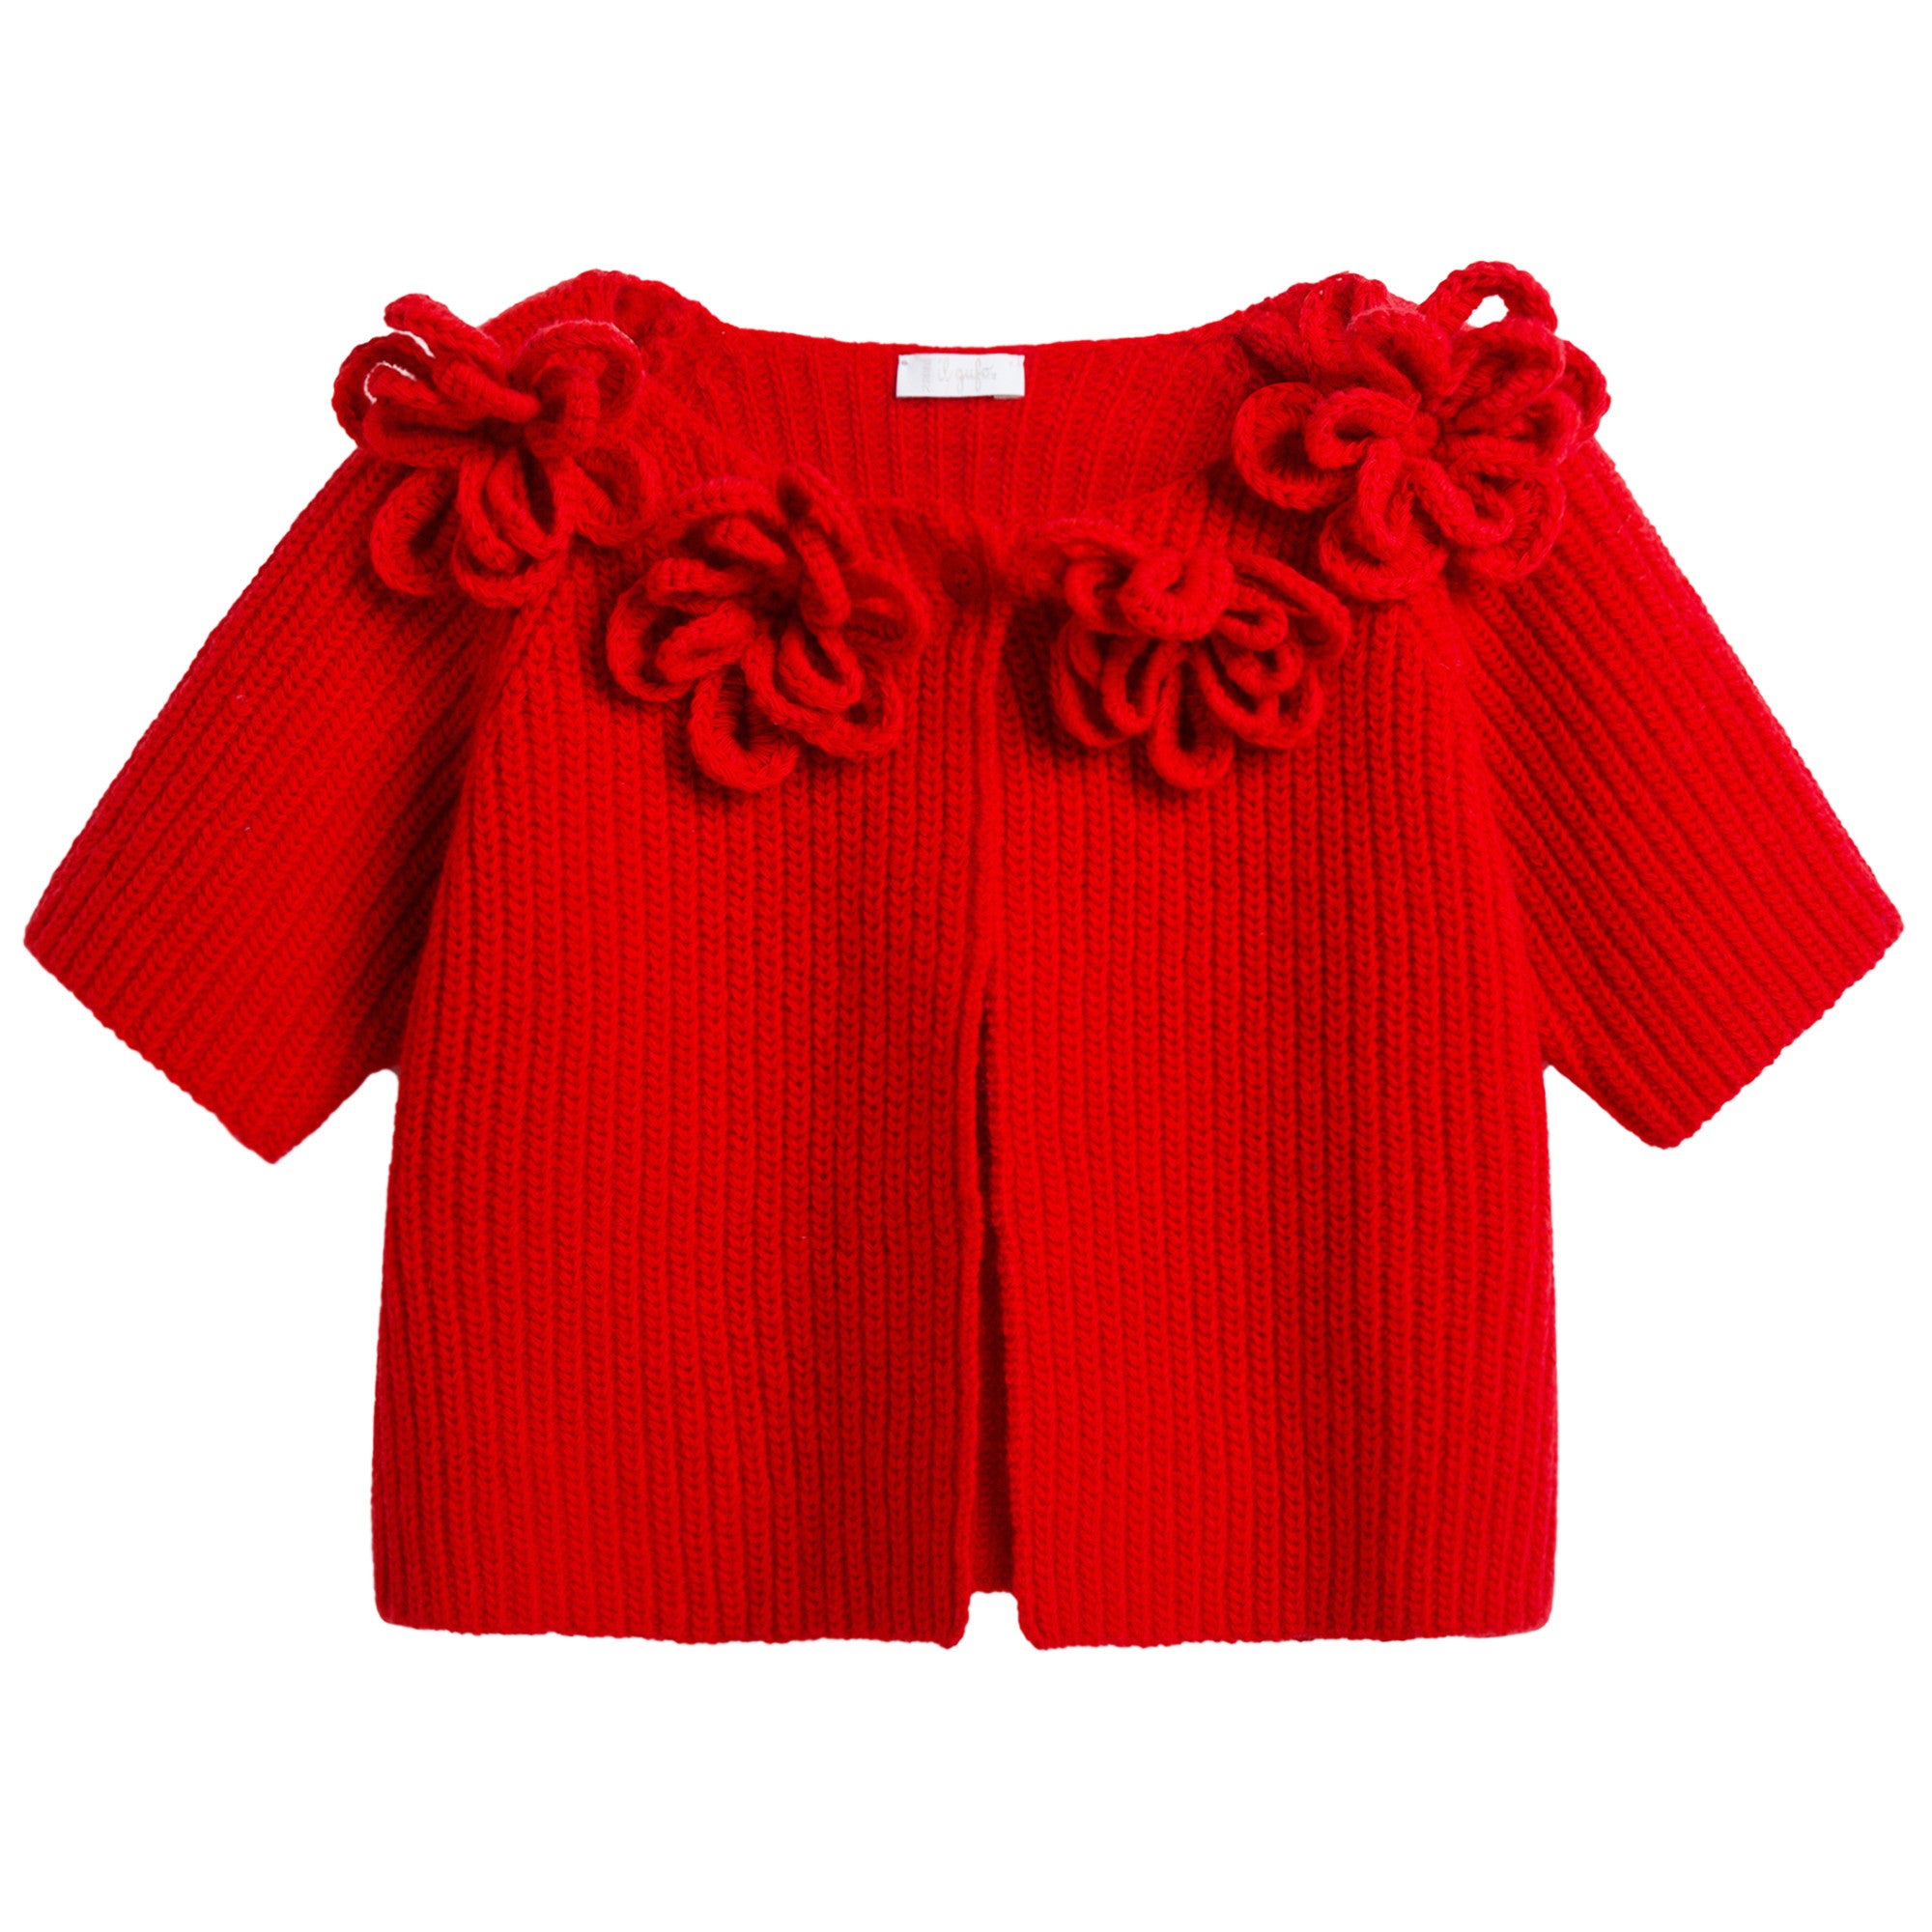 Girls Red Wool Cardigan With Flower Trims